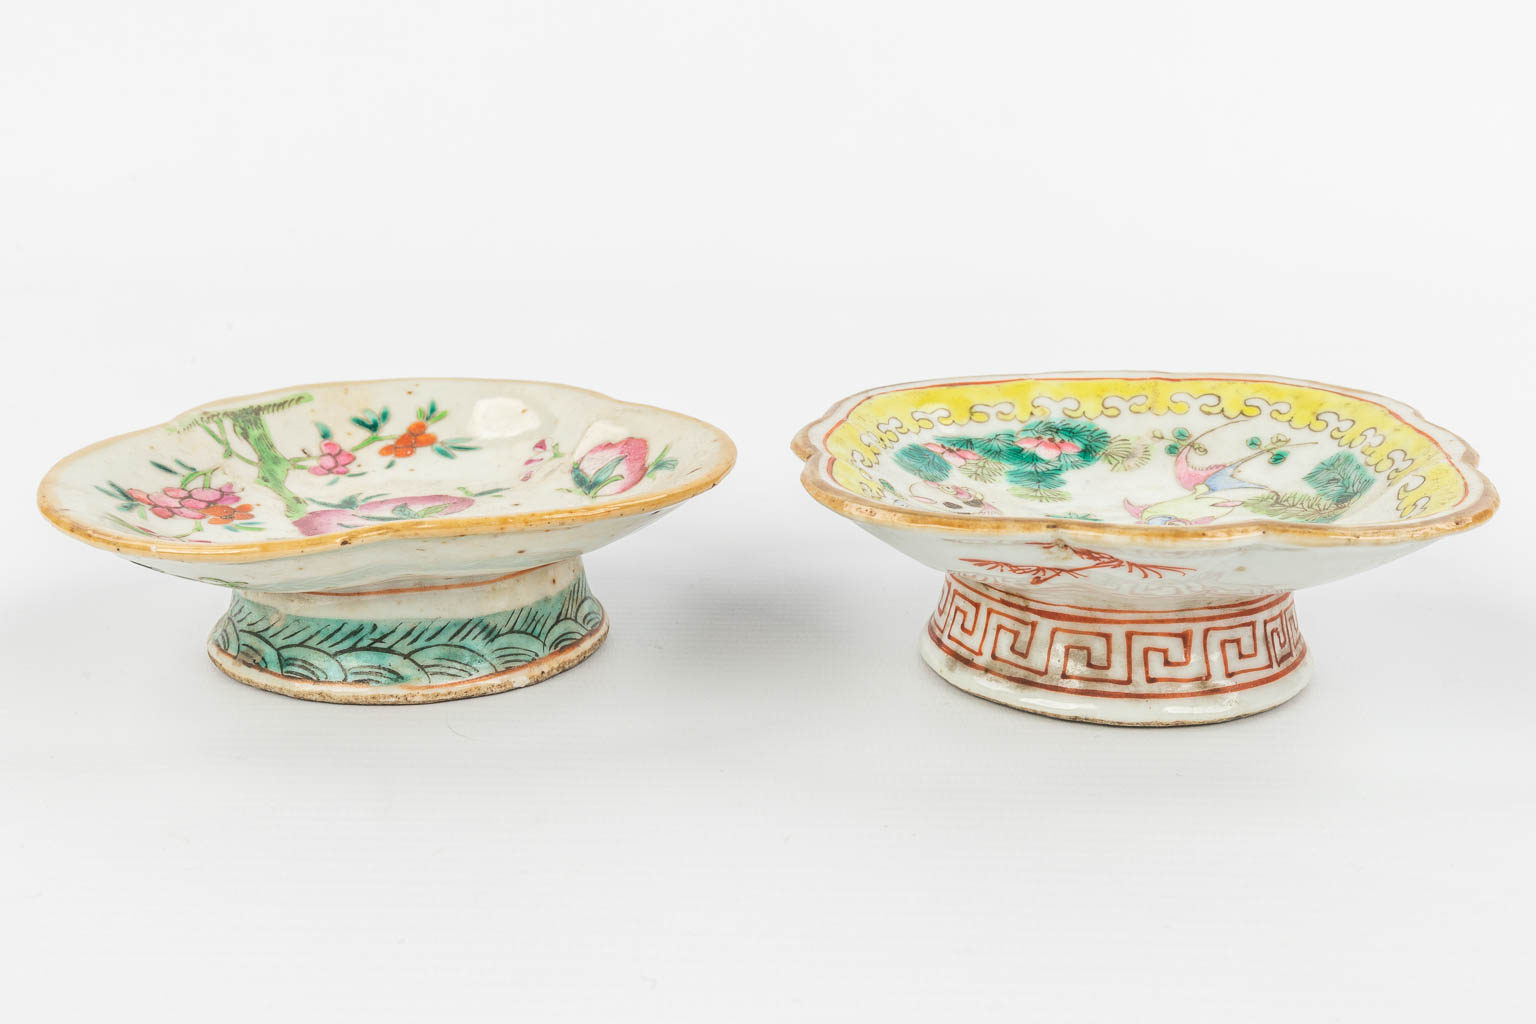 A collection of 2 Oriental bowls with images of peaches and fish. 19th century. (H:3,5cm) - Image 10 of 13